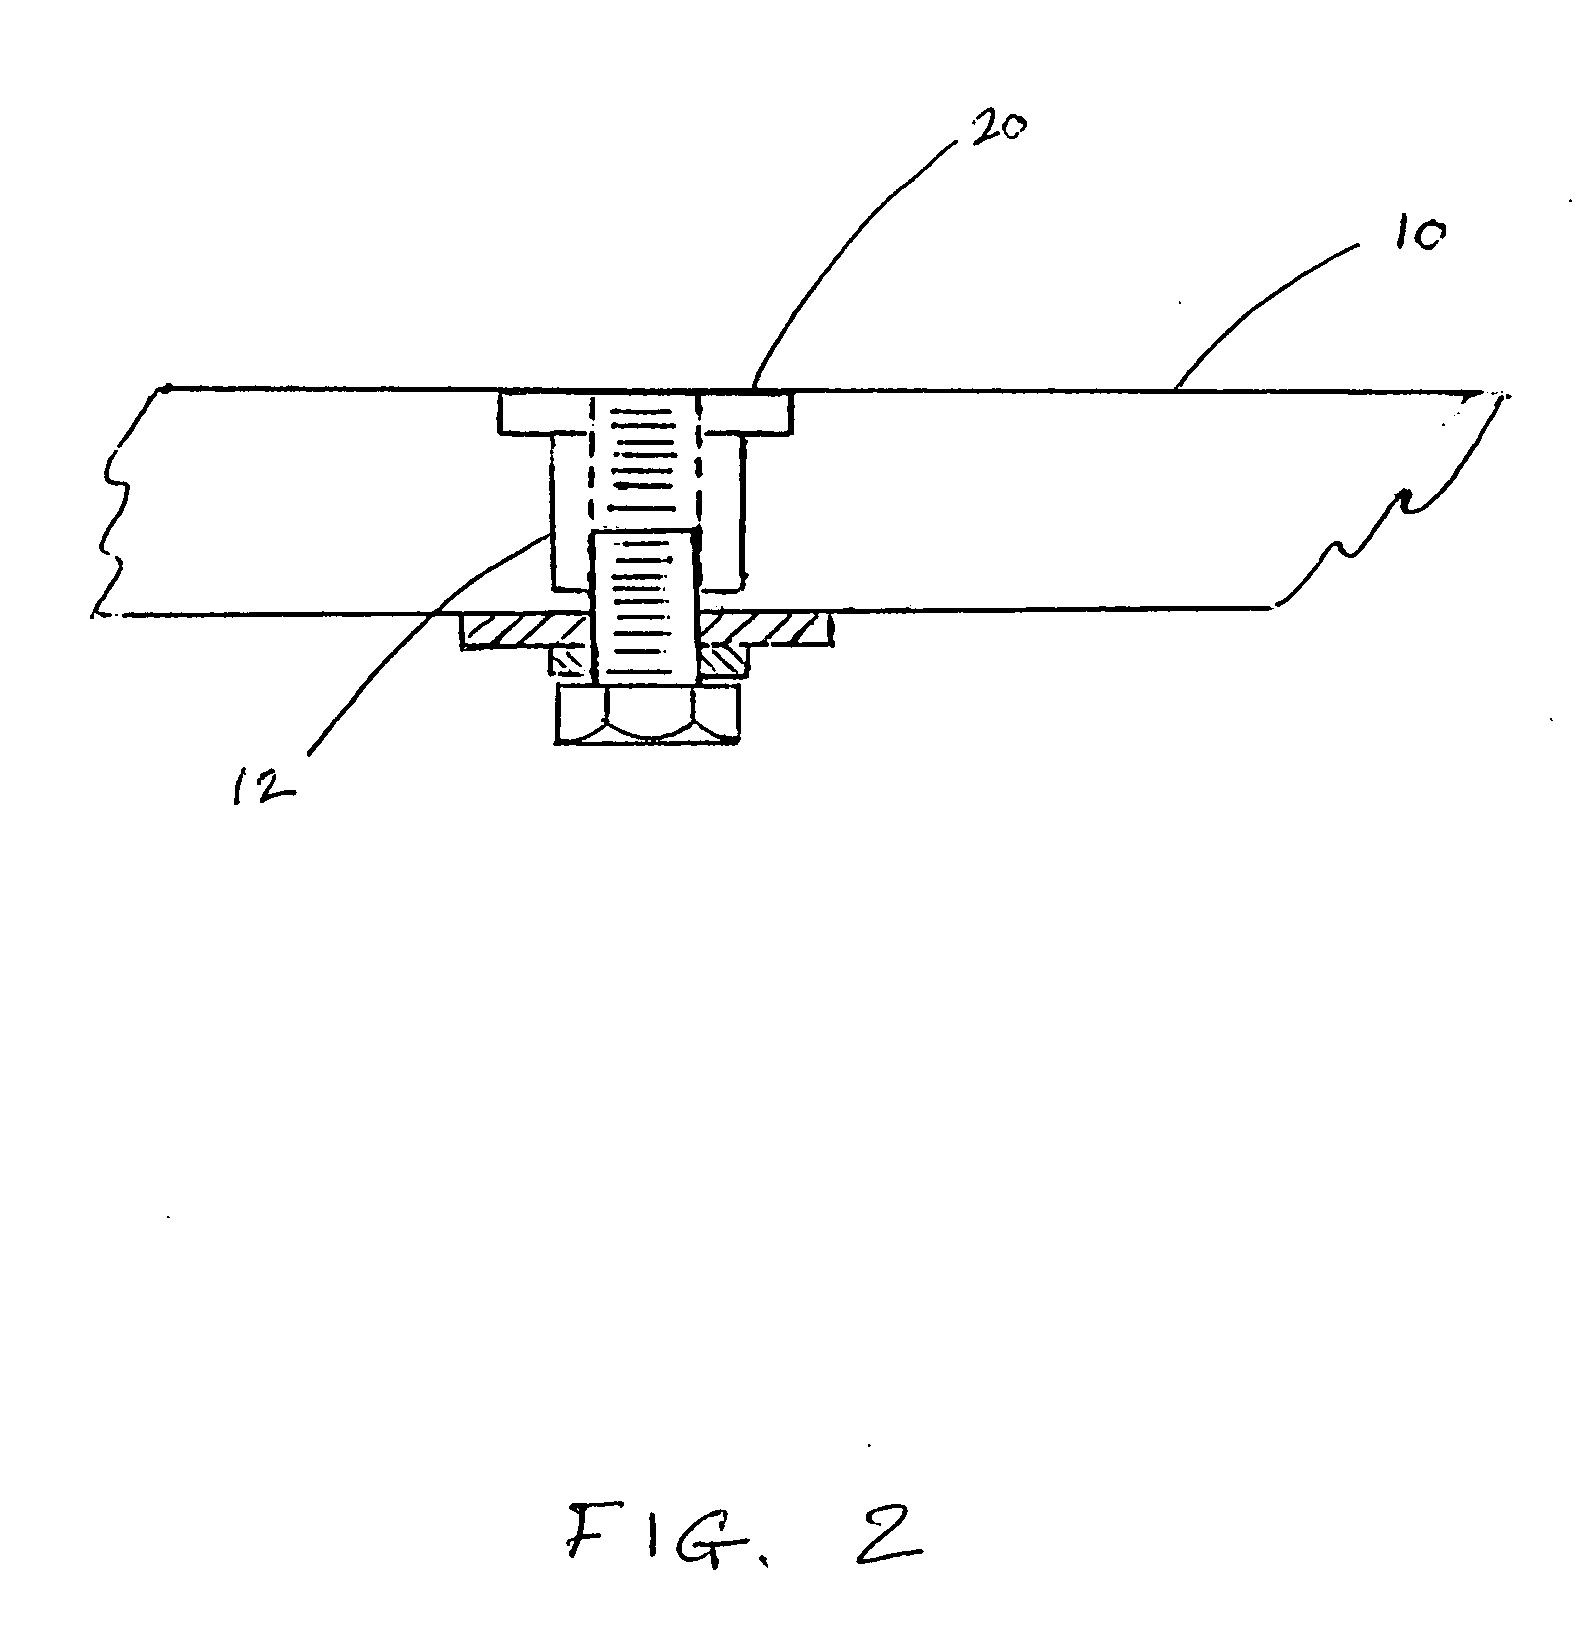 Interchangeable retail display system and method thereof